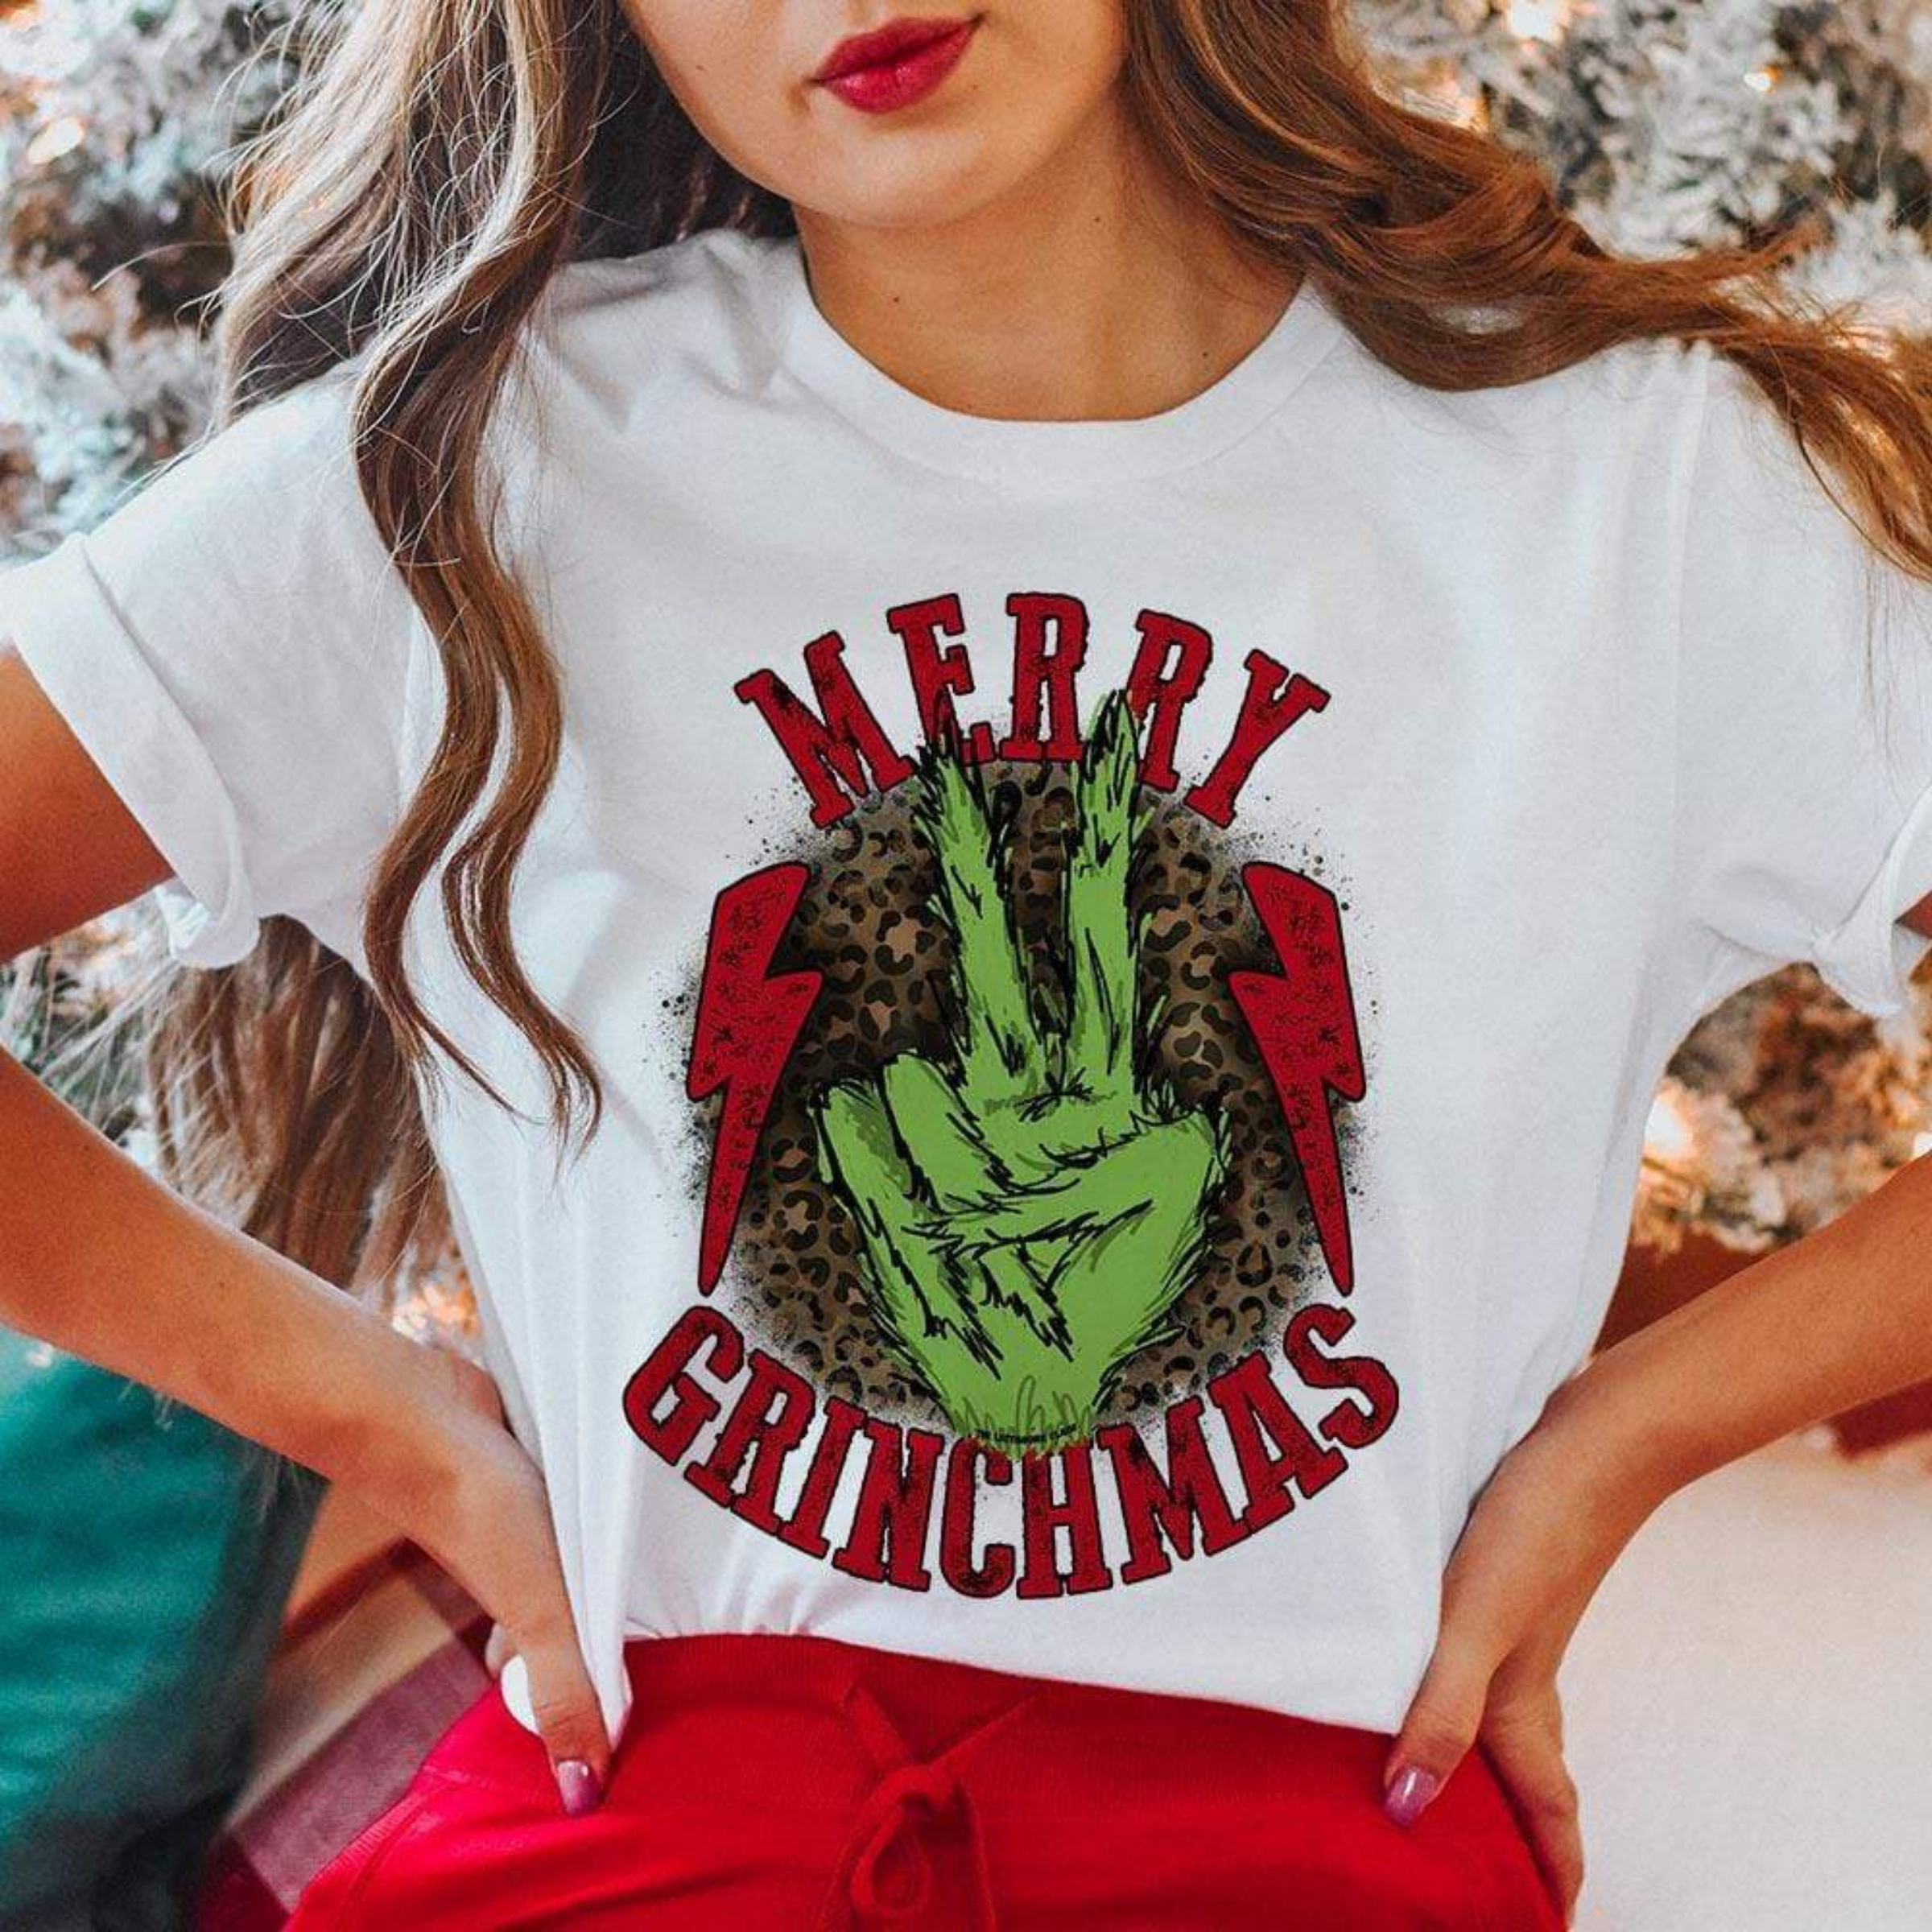 This white tee includes a crew neckline, short sleeves, and a cute Christmas graphic that says "Merry Grinchmas" in red font, a Grinch hand holding up the peace sign, and two red lightning bolts on the outside of the Grinch hand. This graphic also has a leopard print behind it. The model has this graphic tee styled with rolled sleeves and red pants. 